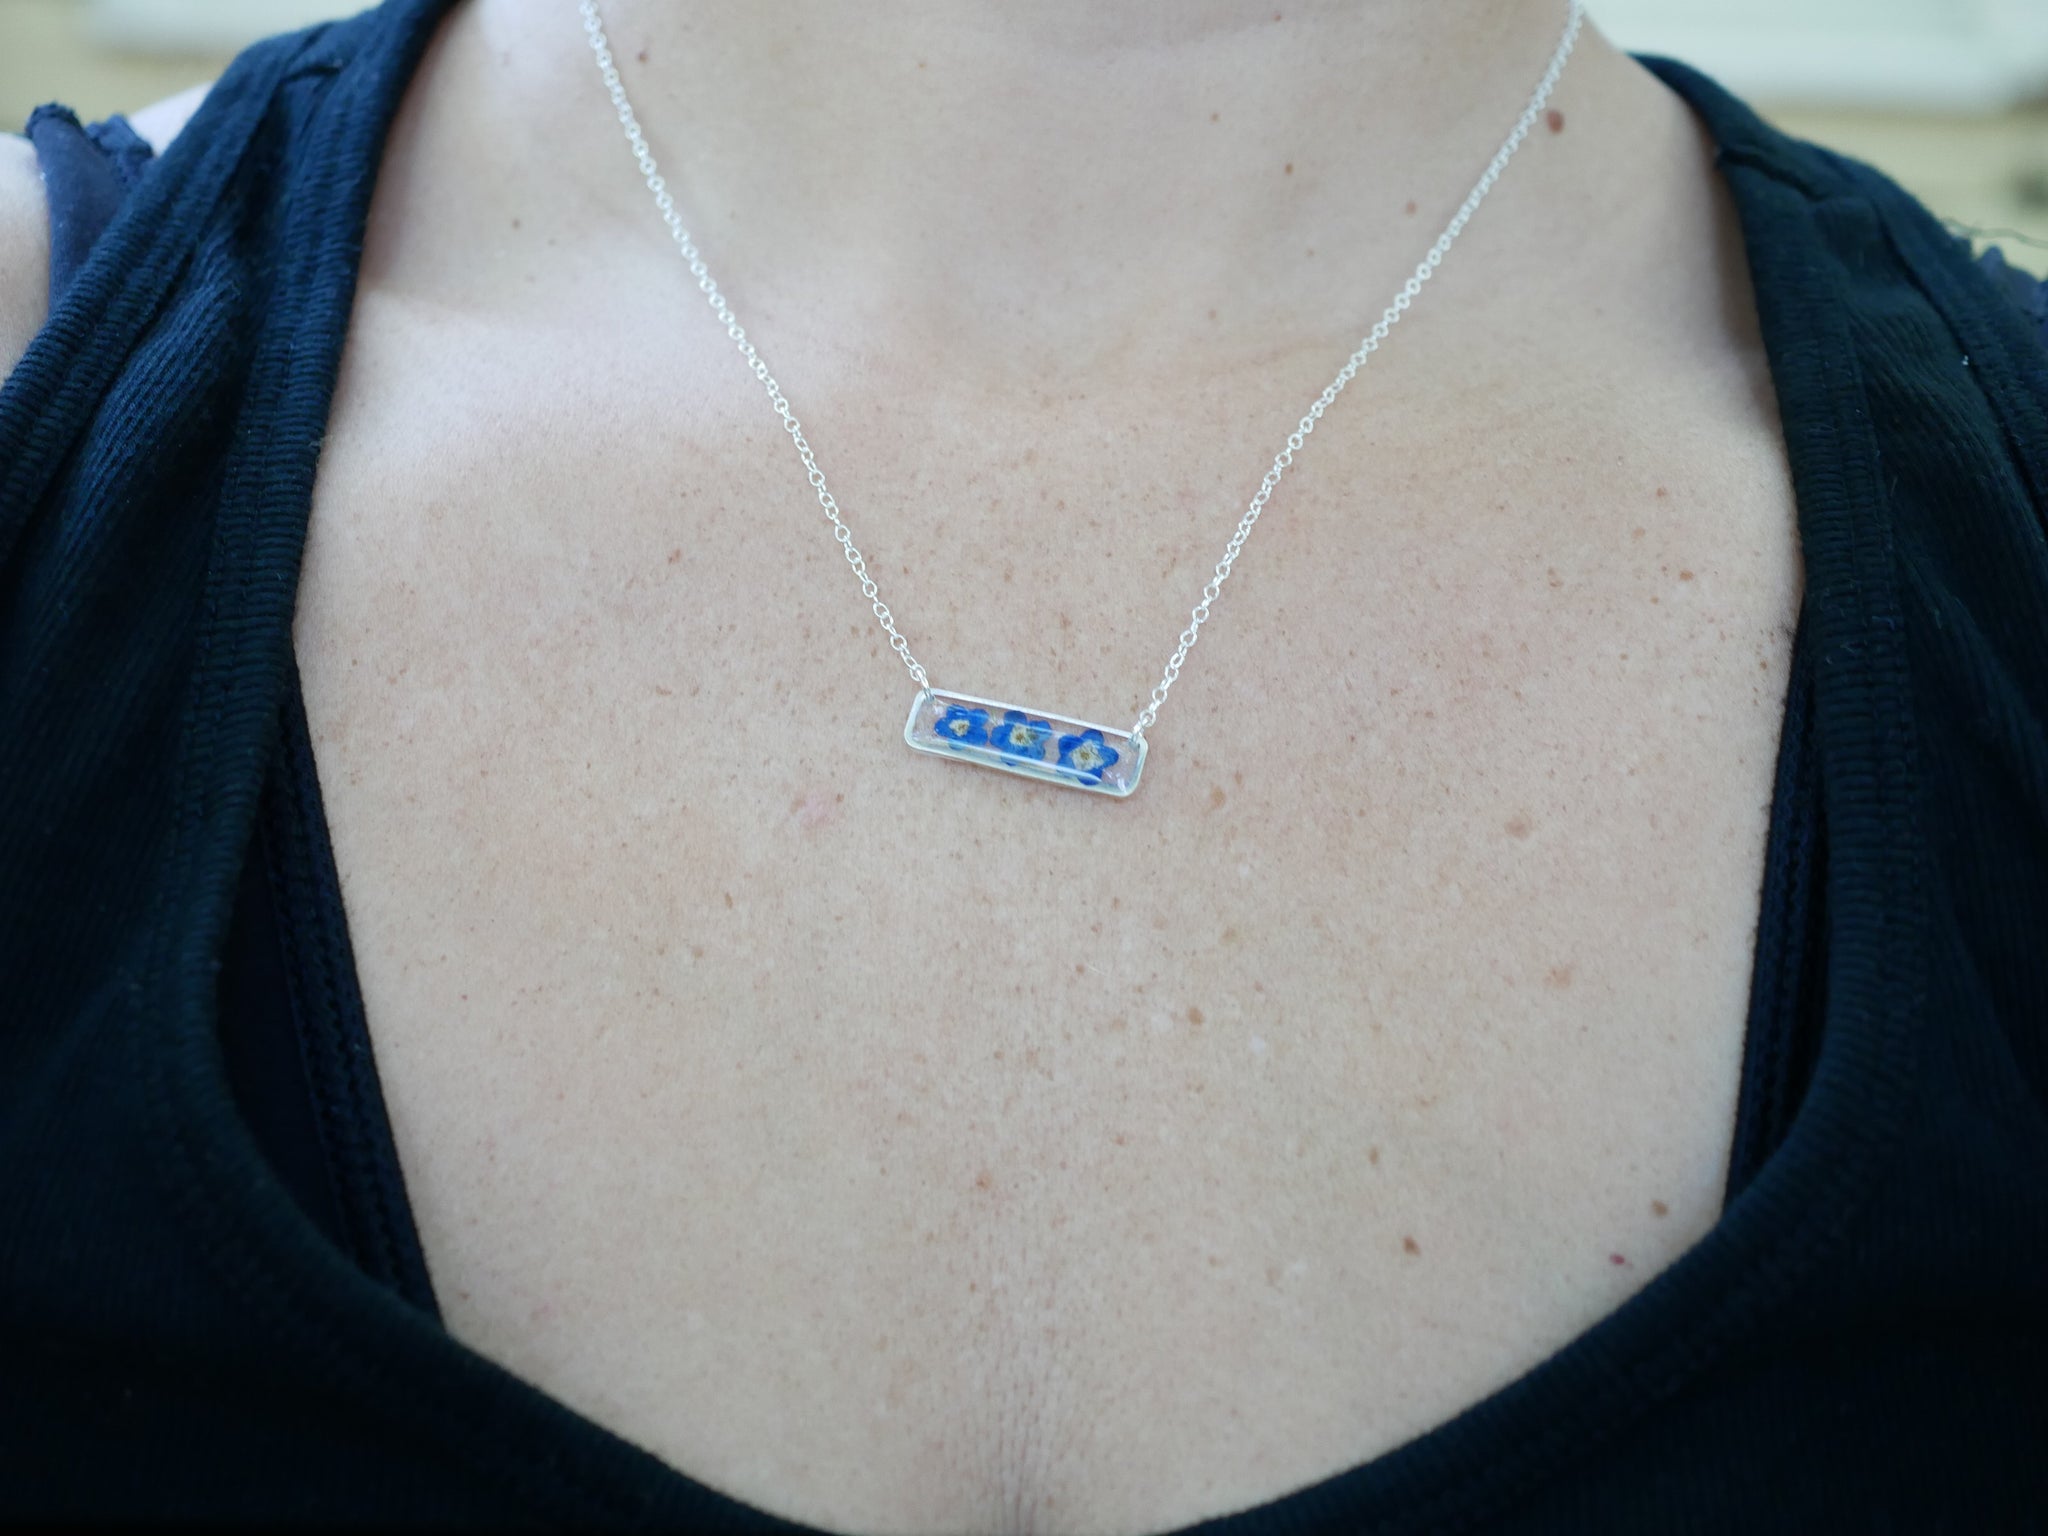 Forget me not horizontal bar necklace